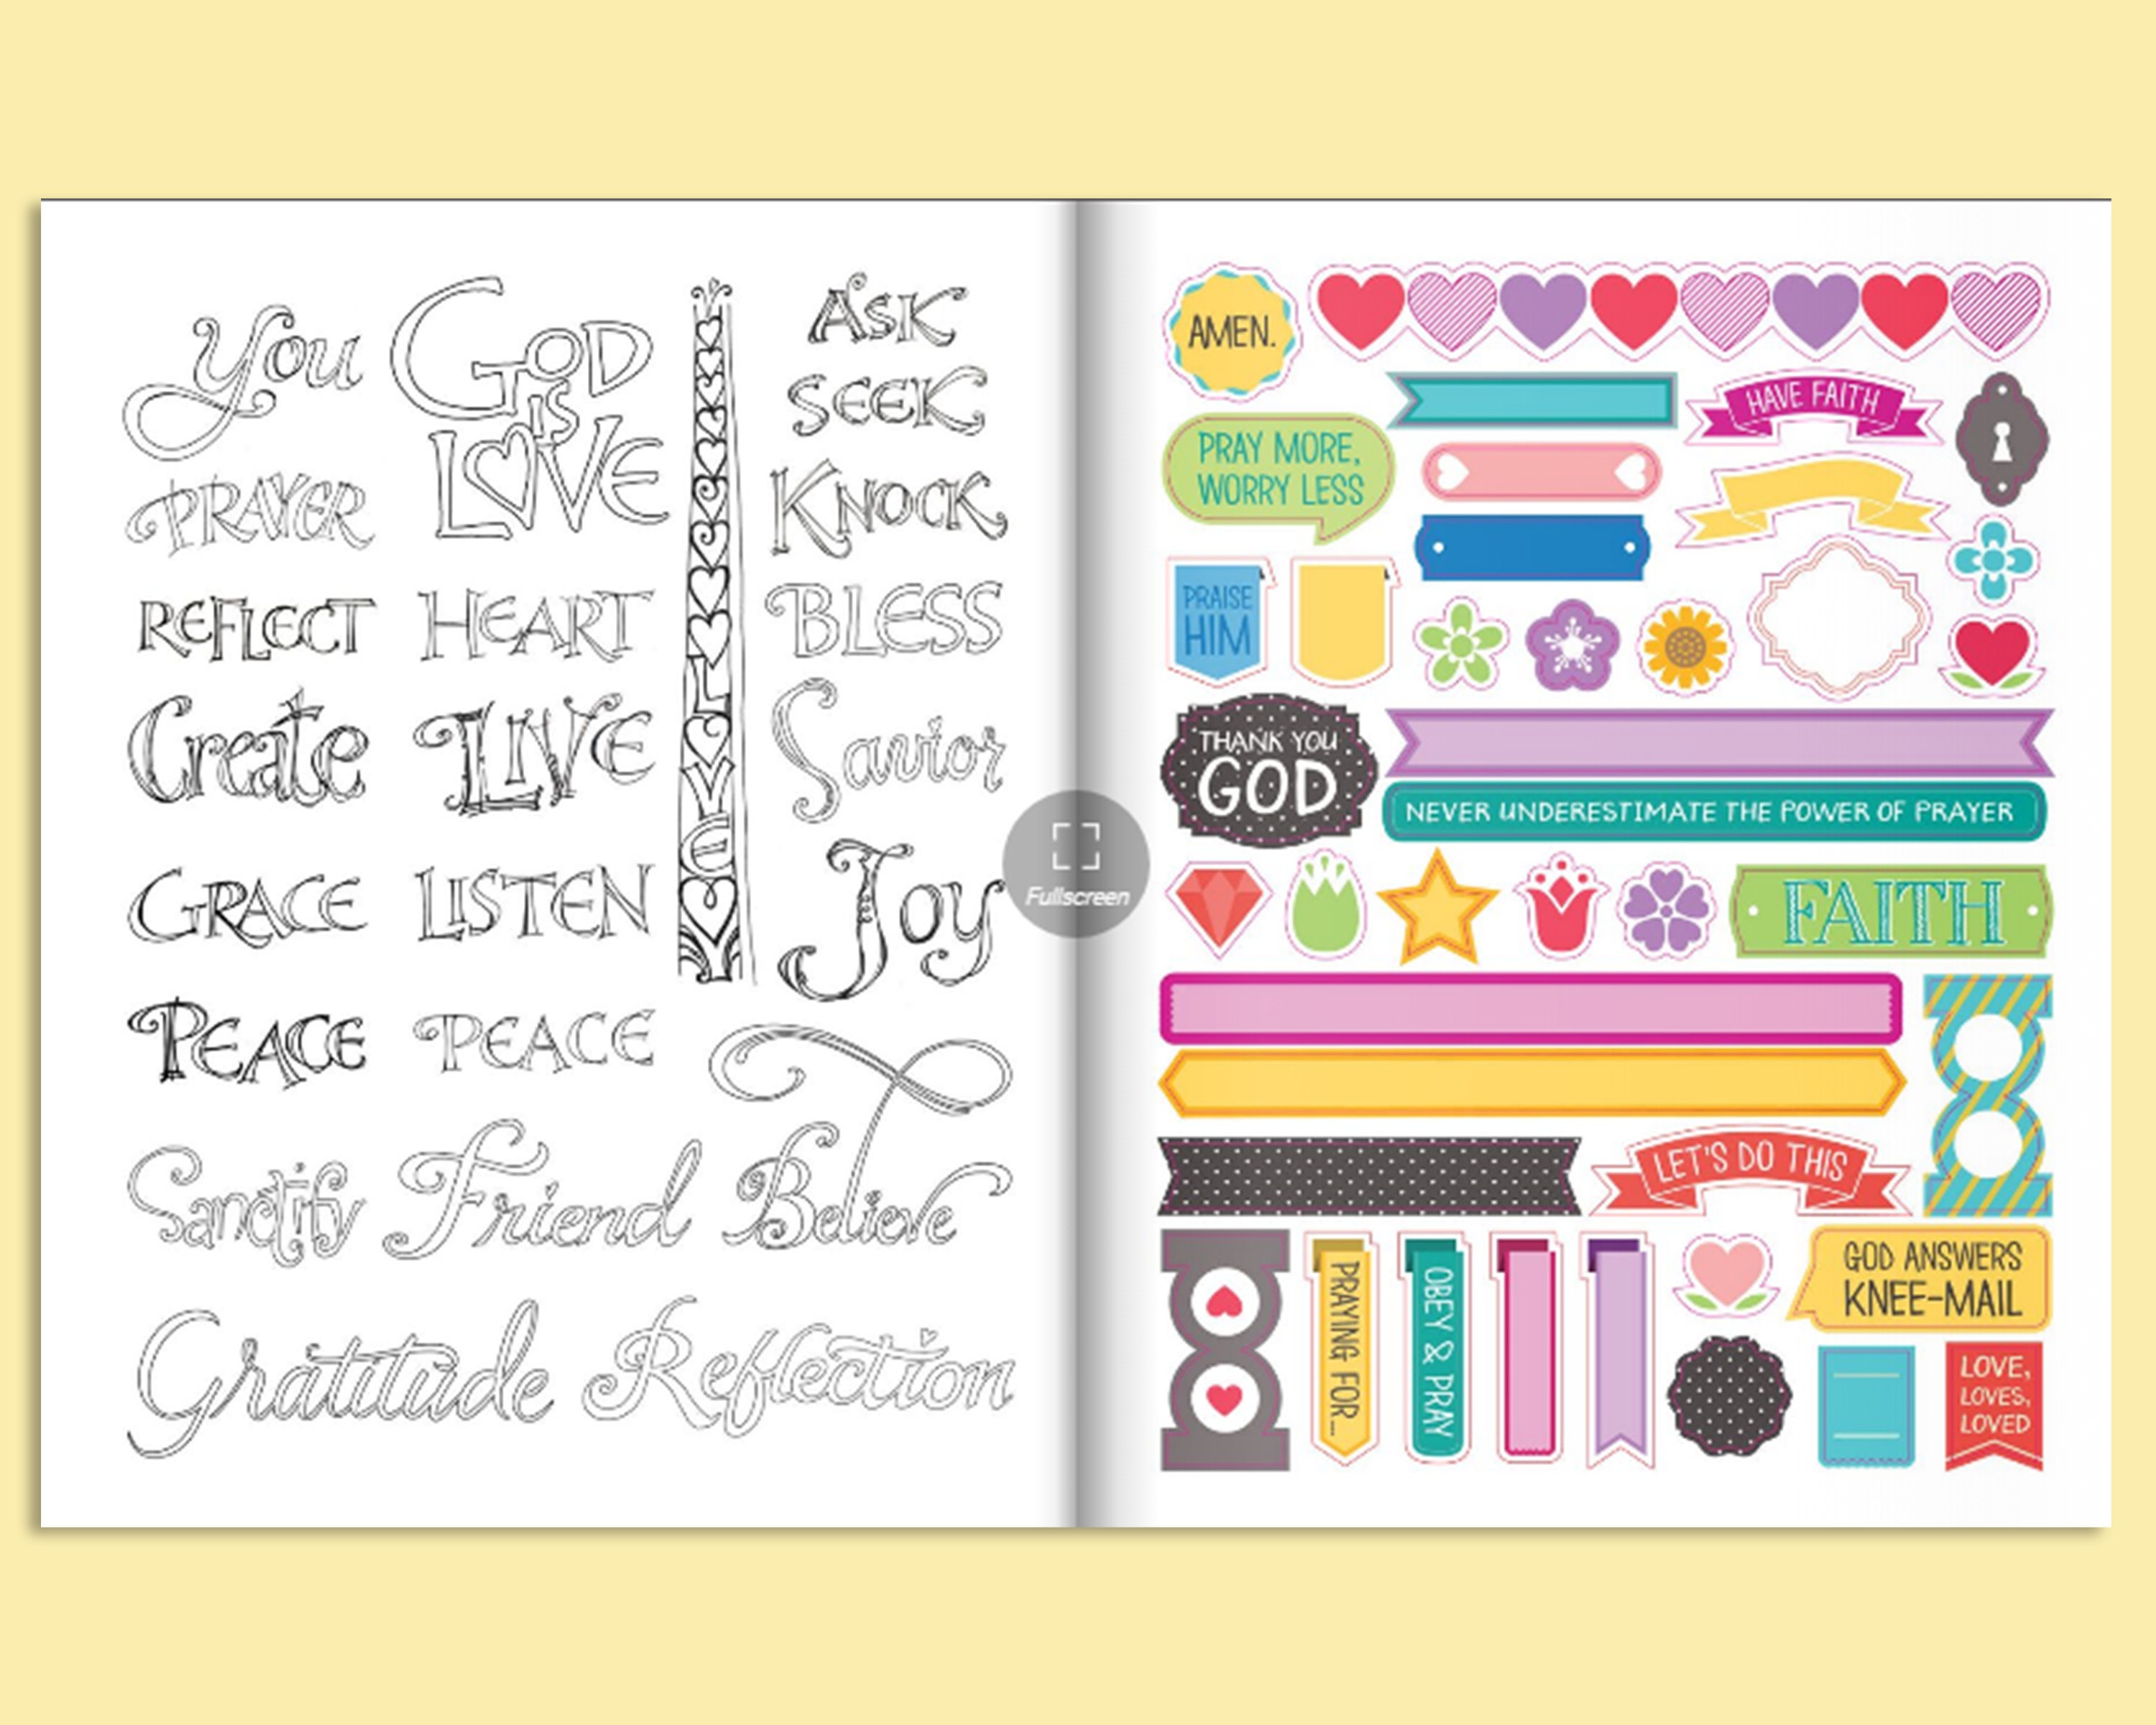 Complete Guide to Bible Journaling: Creative Techniques to Express Your  Faith (Design Originals) Includes 270 Stickers, 150 Designs on Perforated  Pages, and 60 Designs on Translucent Sheets of Vellum: Joanne Fink, Regina